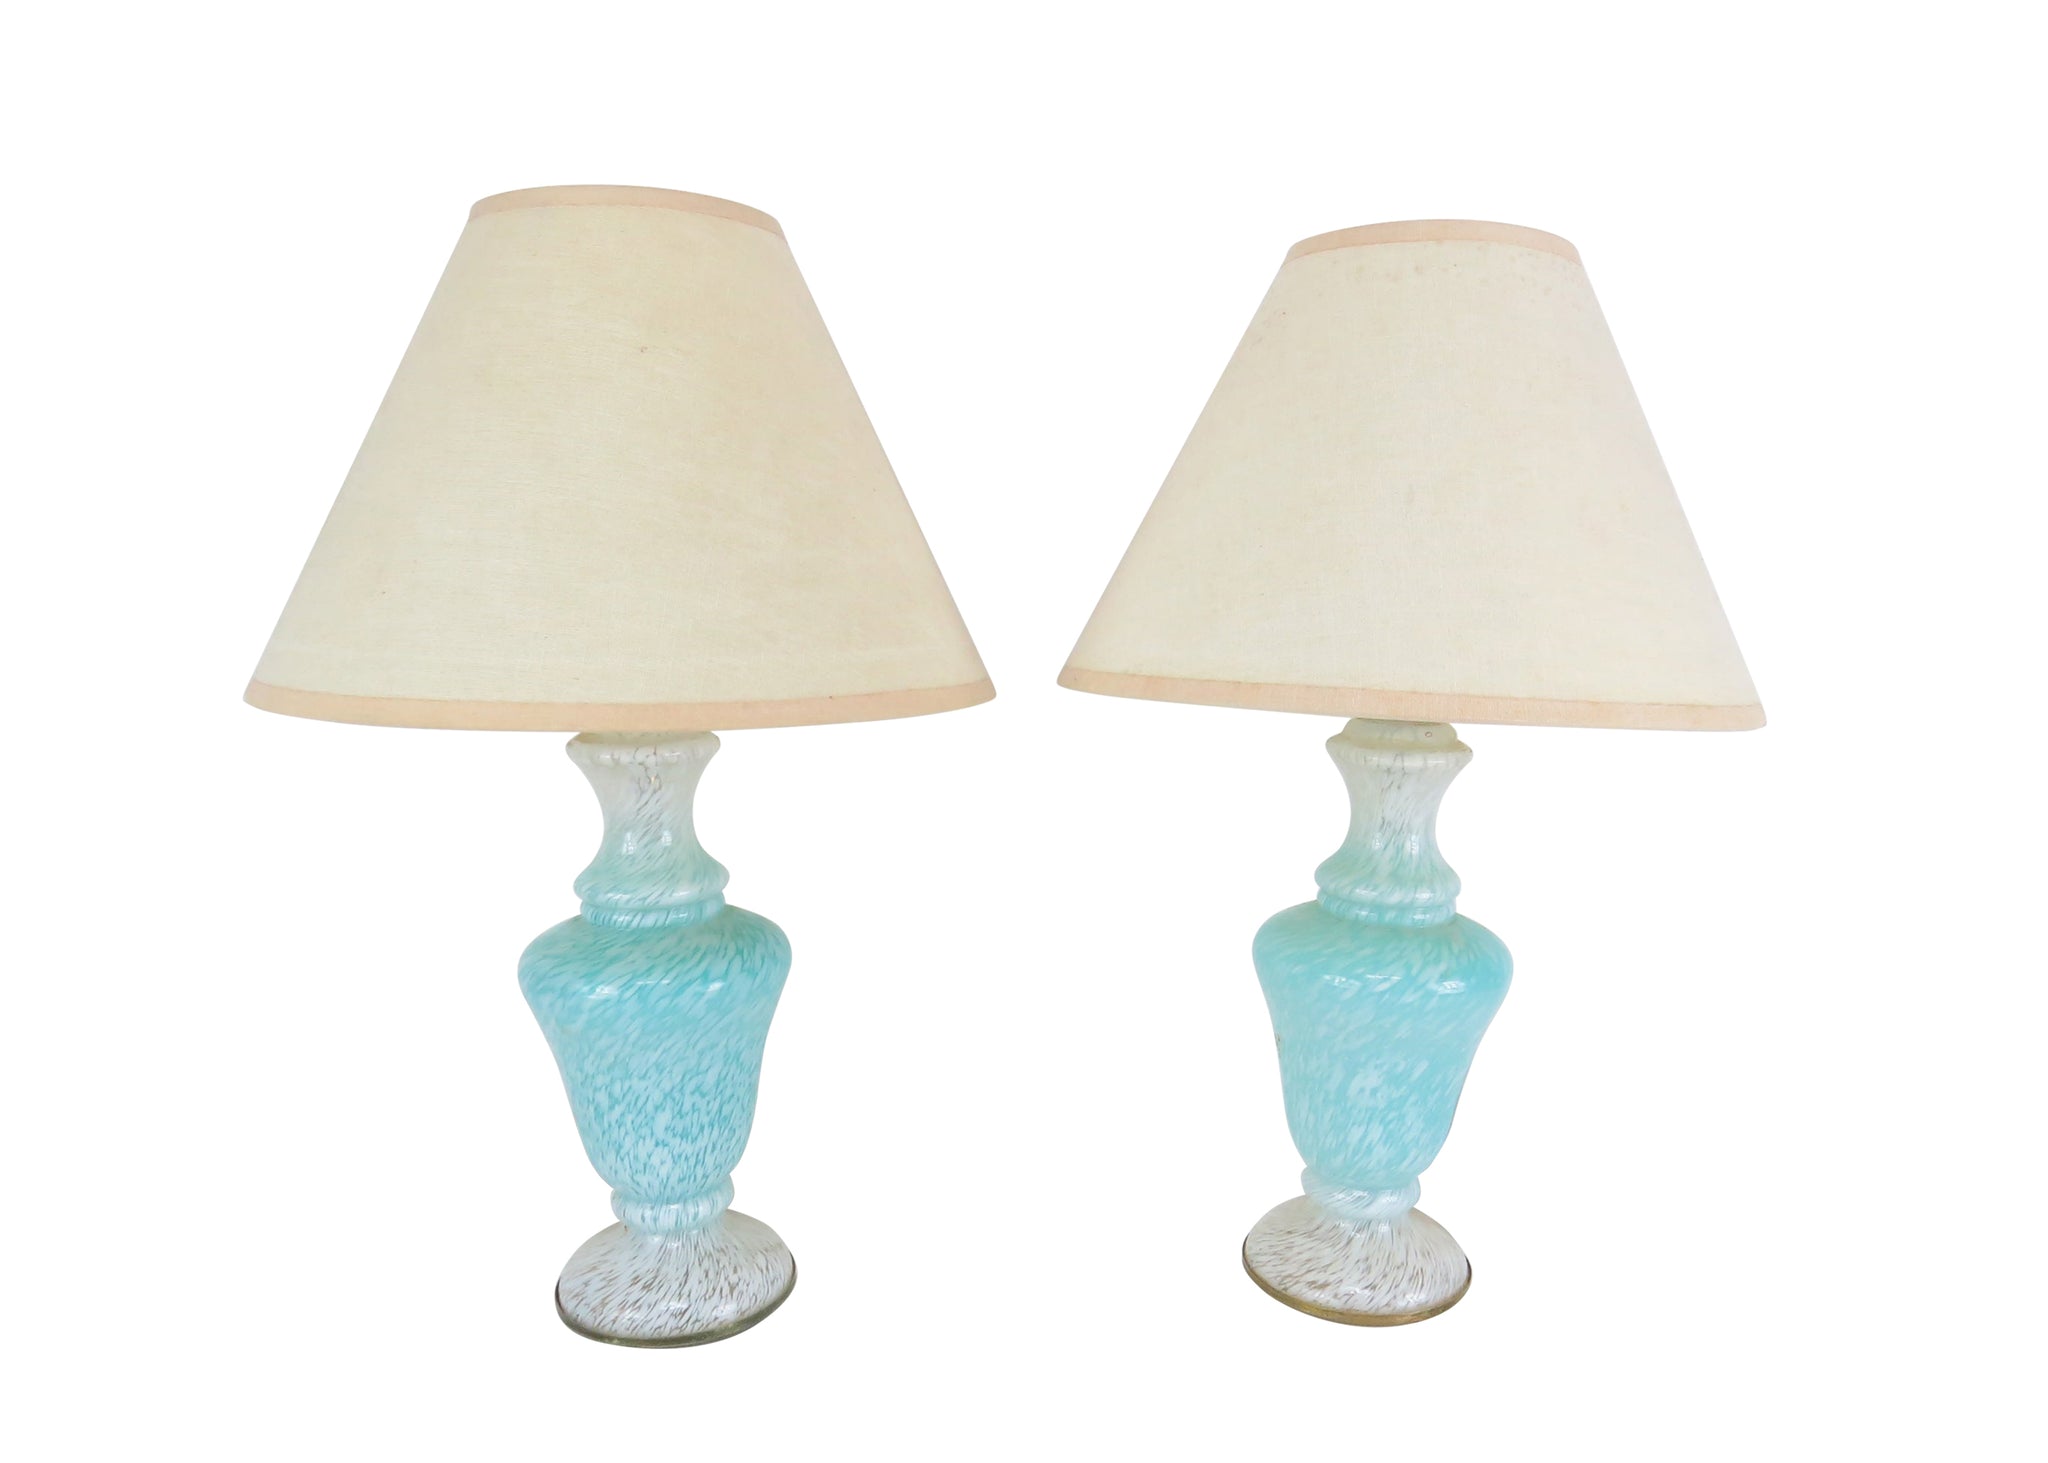 edgebrookhouse - Vintage Mid Century Blue Glass Bedside Lamps With Shades Attributed to Murano - a Pair